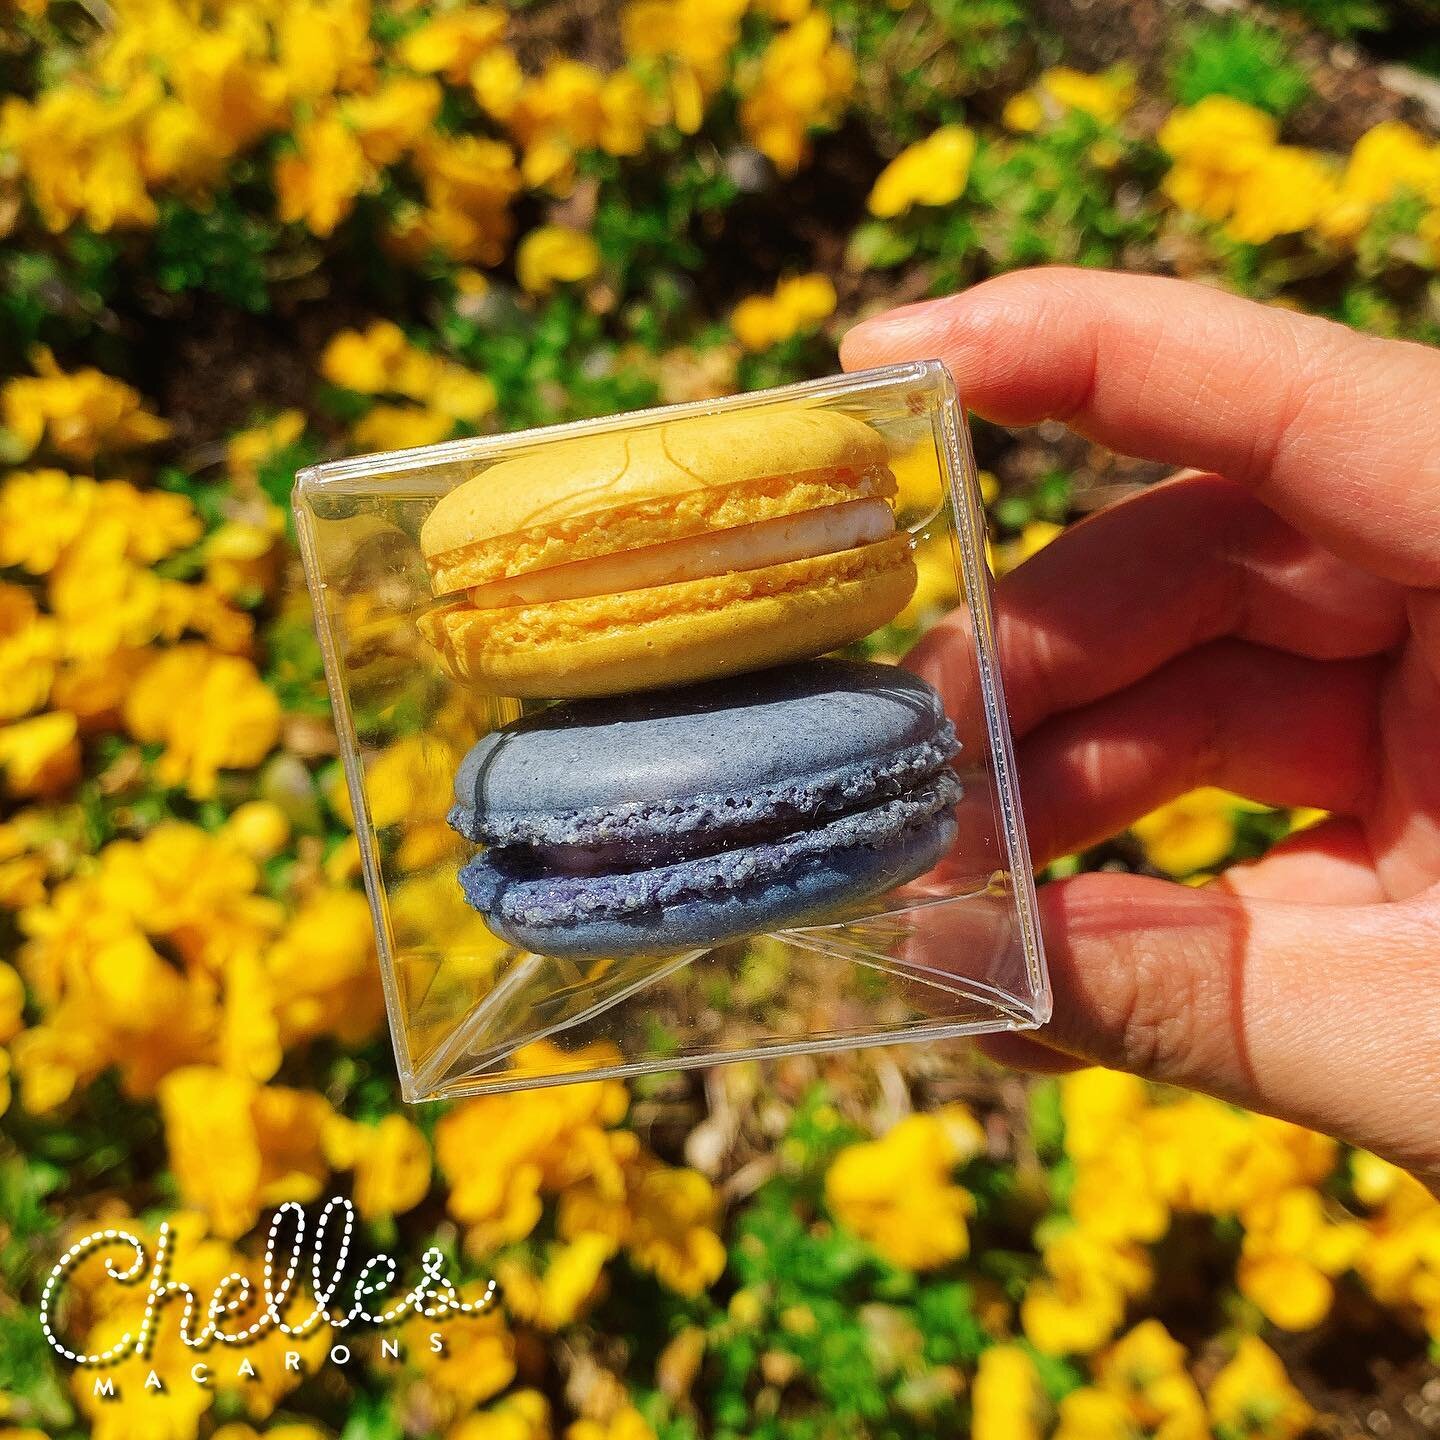 A sunny Sunday morning hanging out with our lovely lemon and lemon berry macarons ! 🤩 

#ChellesMacarons #macaron #frenchmacarons #bakery #baking #foodie #sweettooth #cookies #dallasfoodie #instafood #instagood #dessert #macaronlove #patisserie #mac